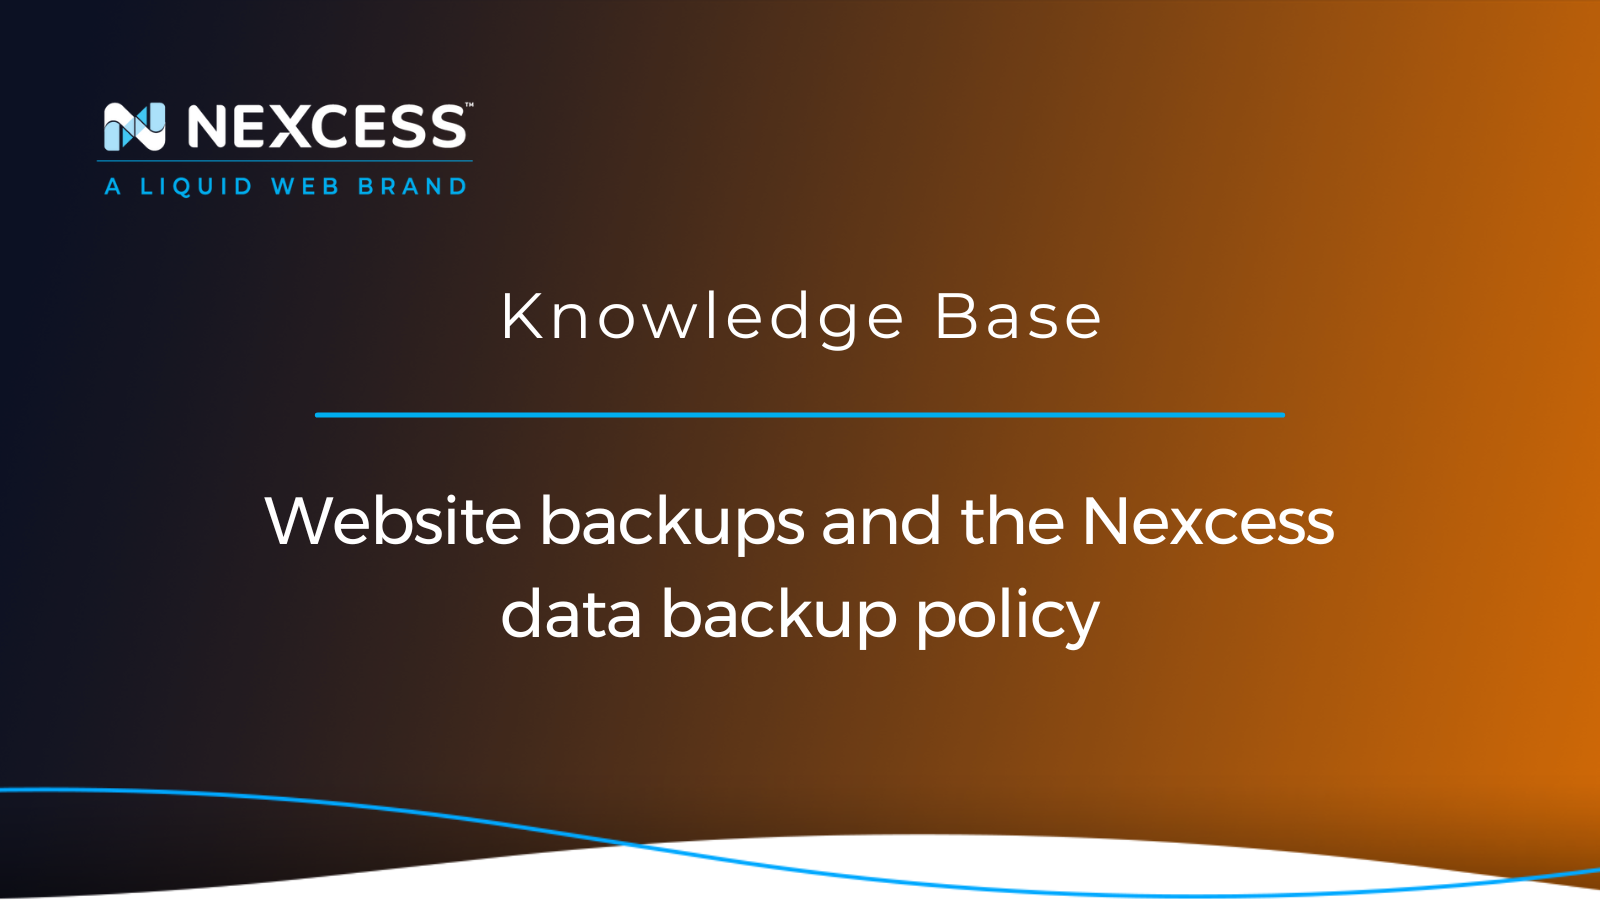 Website backups and the Nexcess data backup policy